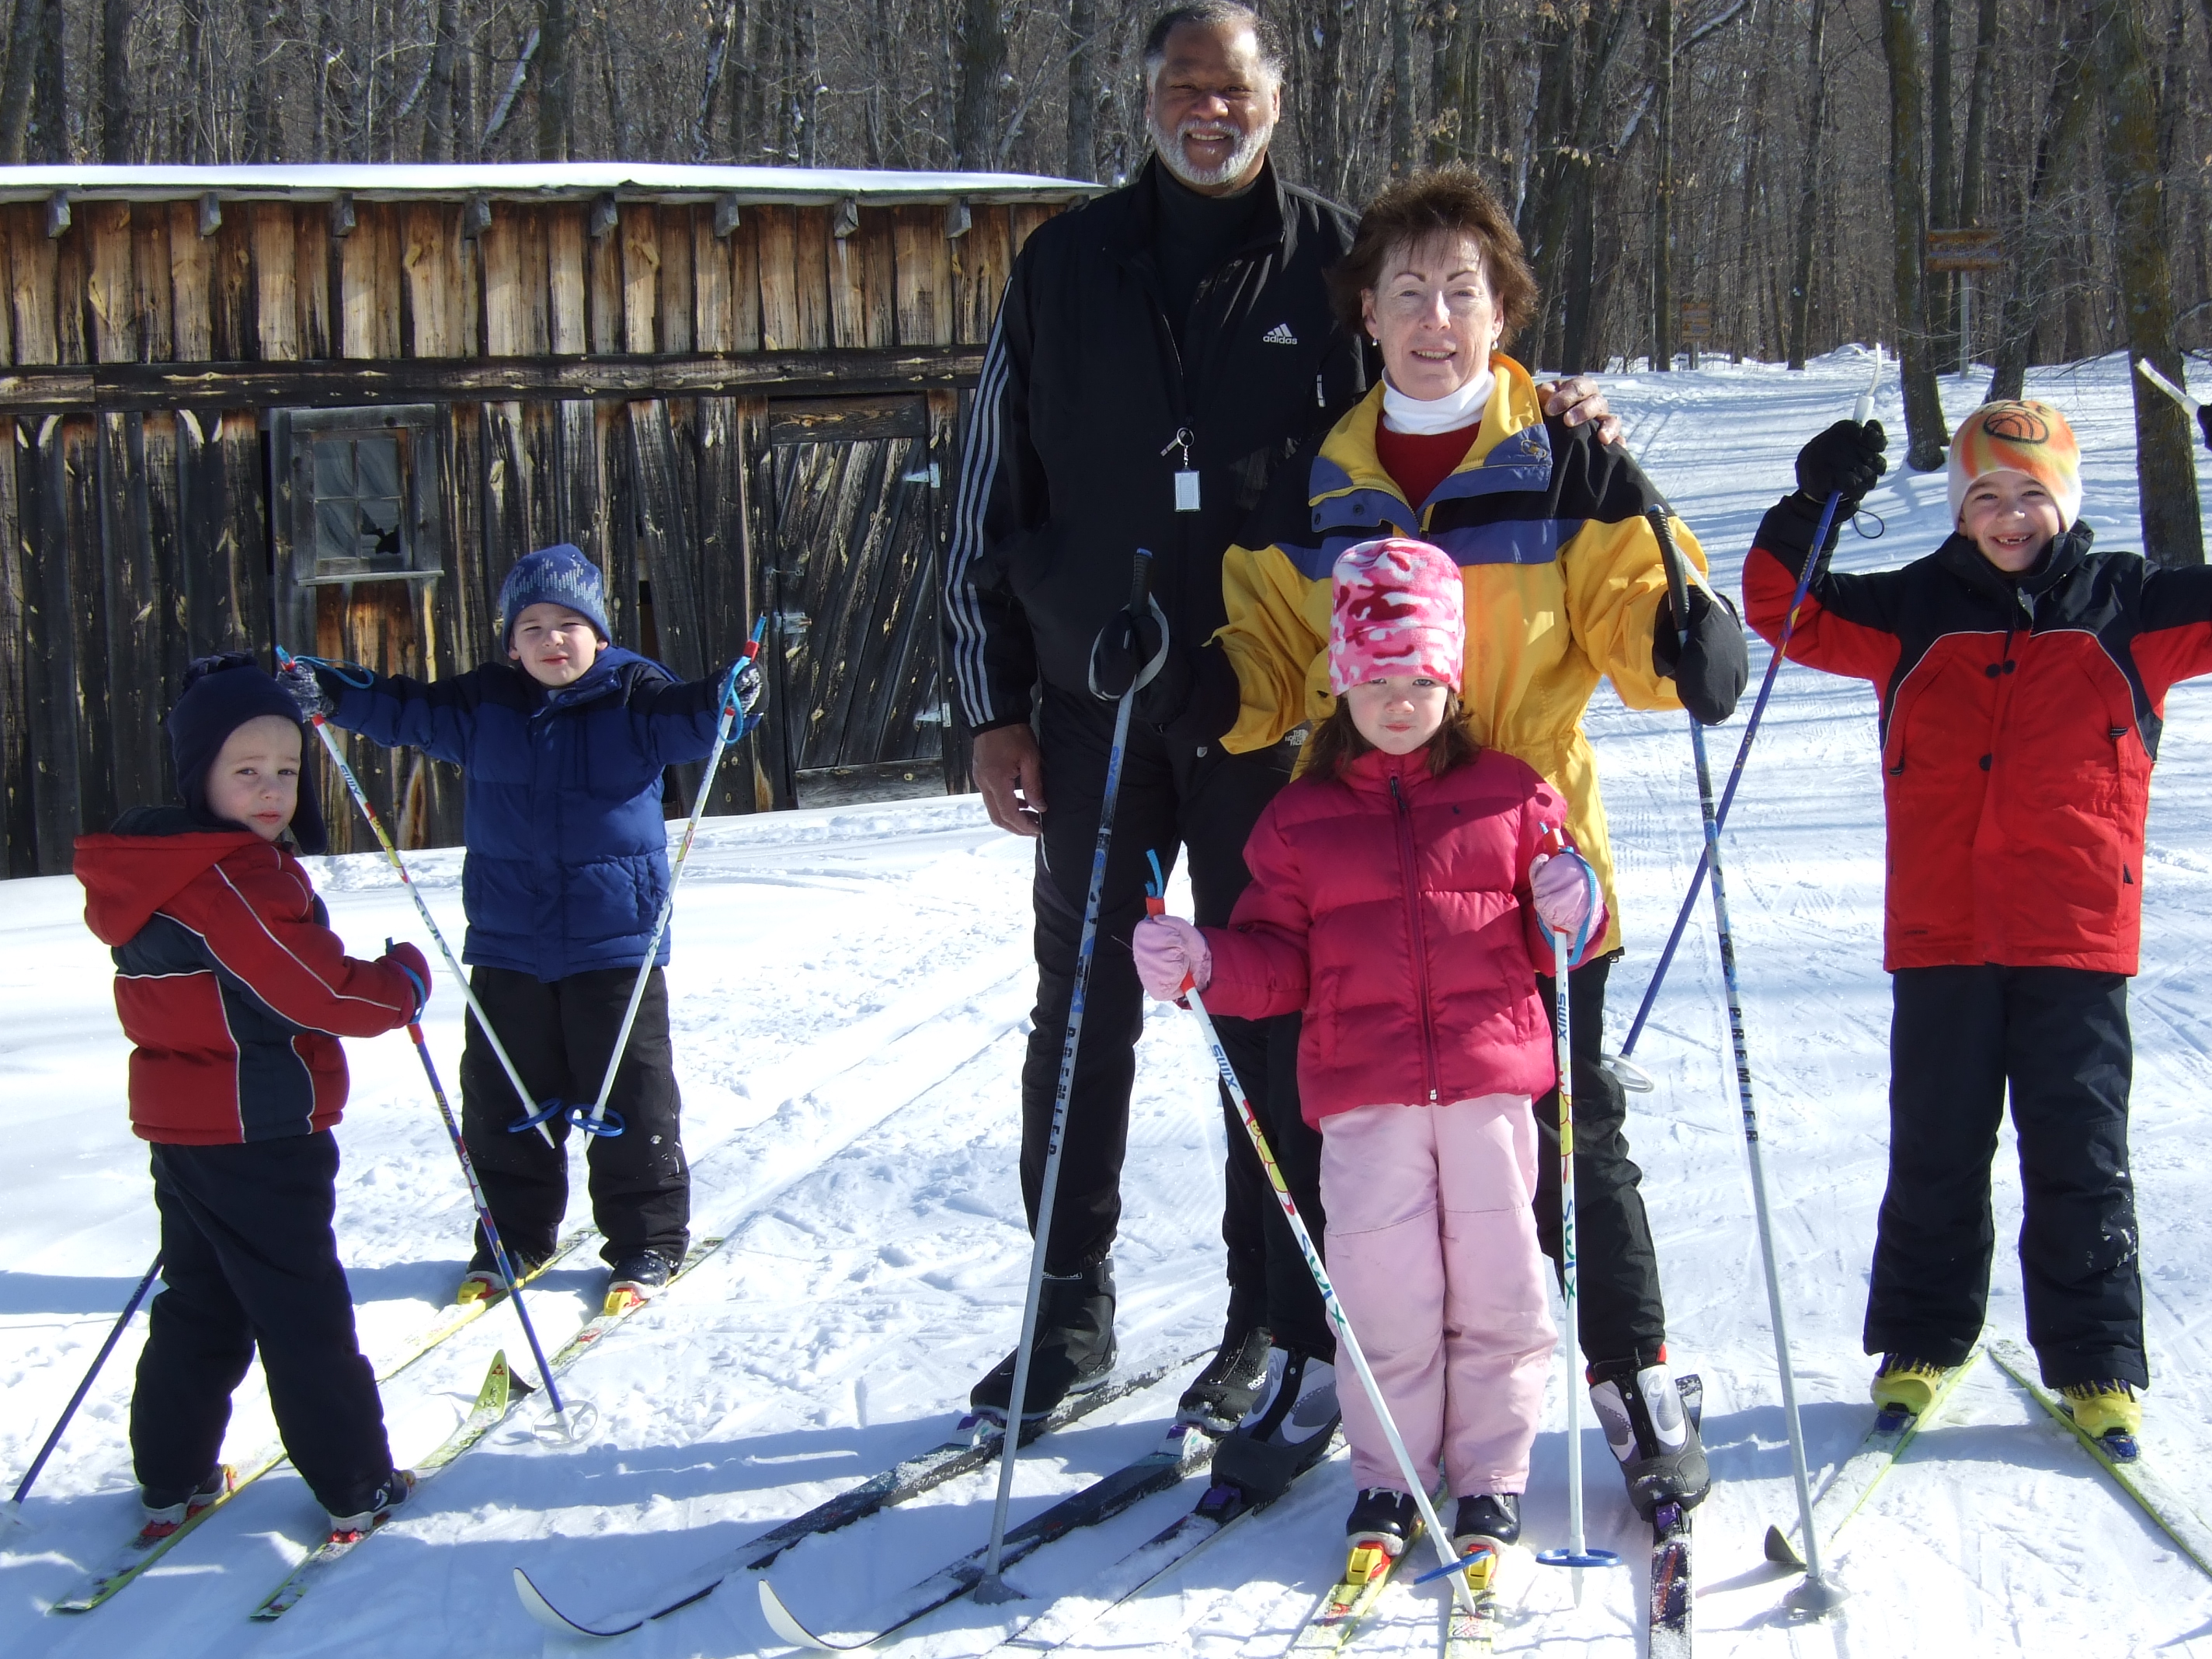 Photo provided by Jennifer Niemeierof Pat Palecek and Denny Rogers and 4 of their grandkids.  We were up Feb 21-23.  It was Joe's first time on skis and he really got going!!   >From Left to Right:  Joe Niemeier (4), Jack Niemeier (6), Denny Rogers, Pat Palecek, Ellie Gilbert (4) and Kyle Gilbert (7)